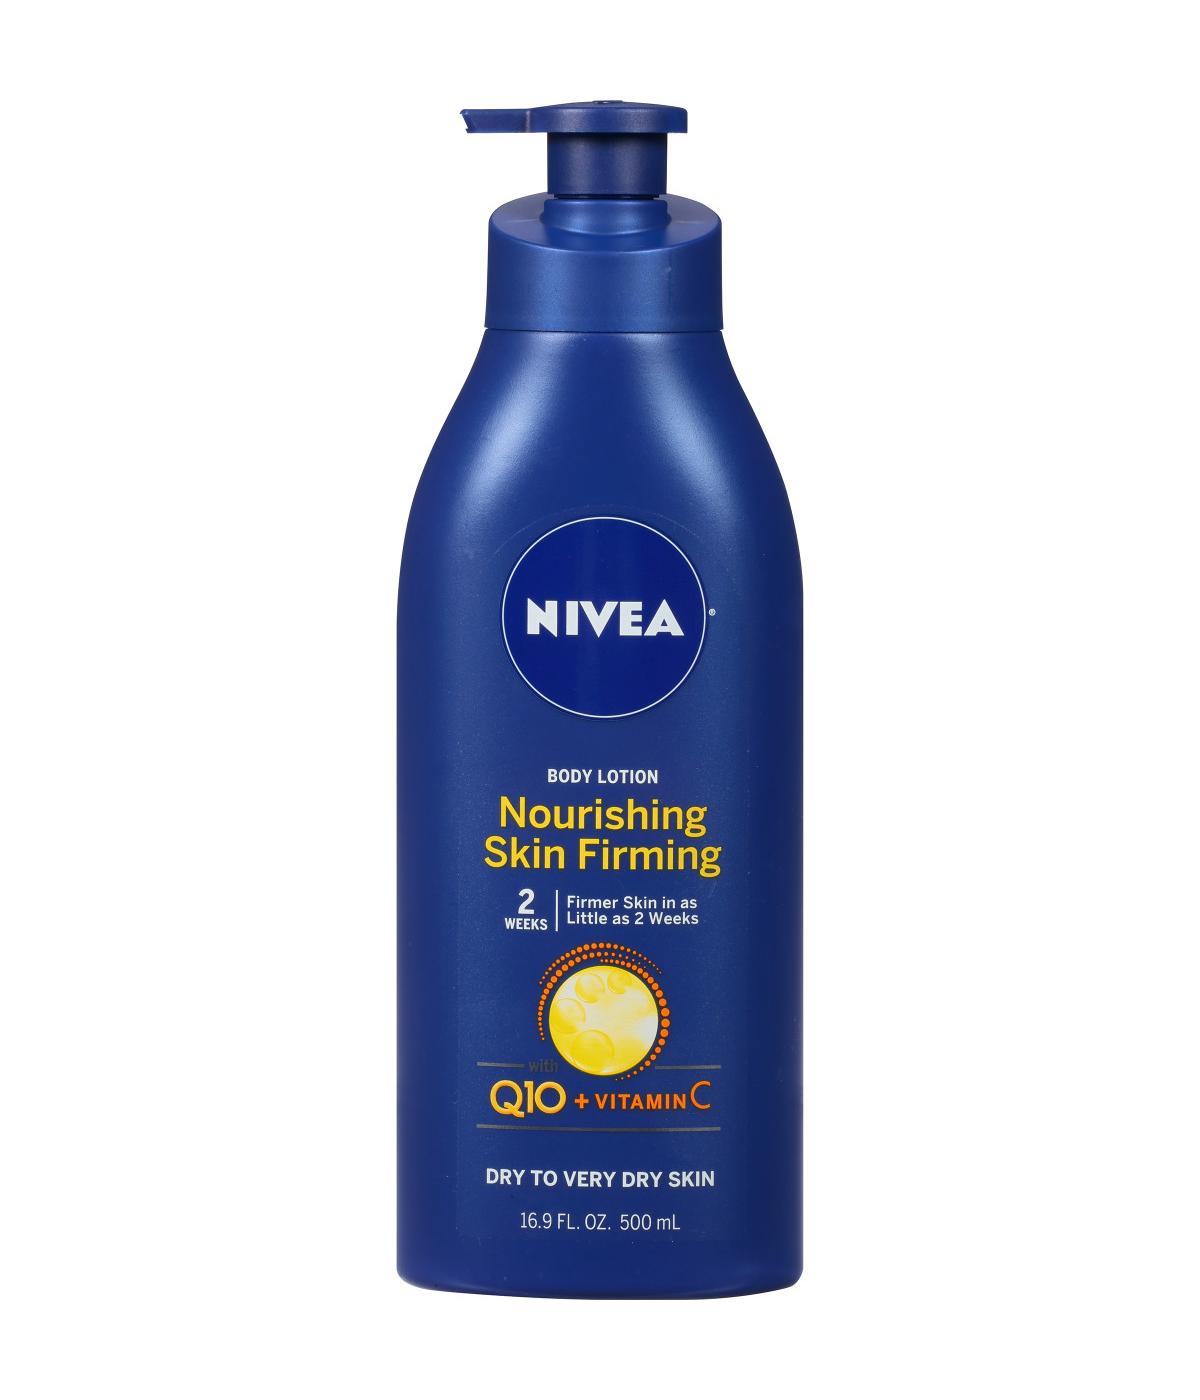 NIVEA Nourishing Skin Firming Body Lotion with Q10 and Vitamin C; image 1 of 4